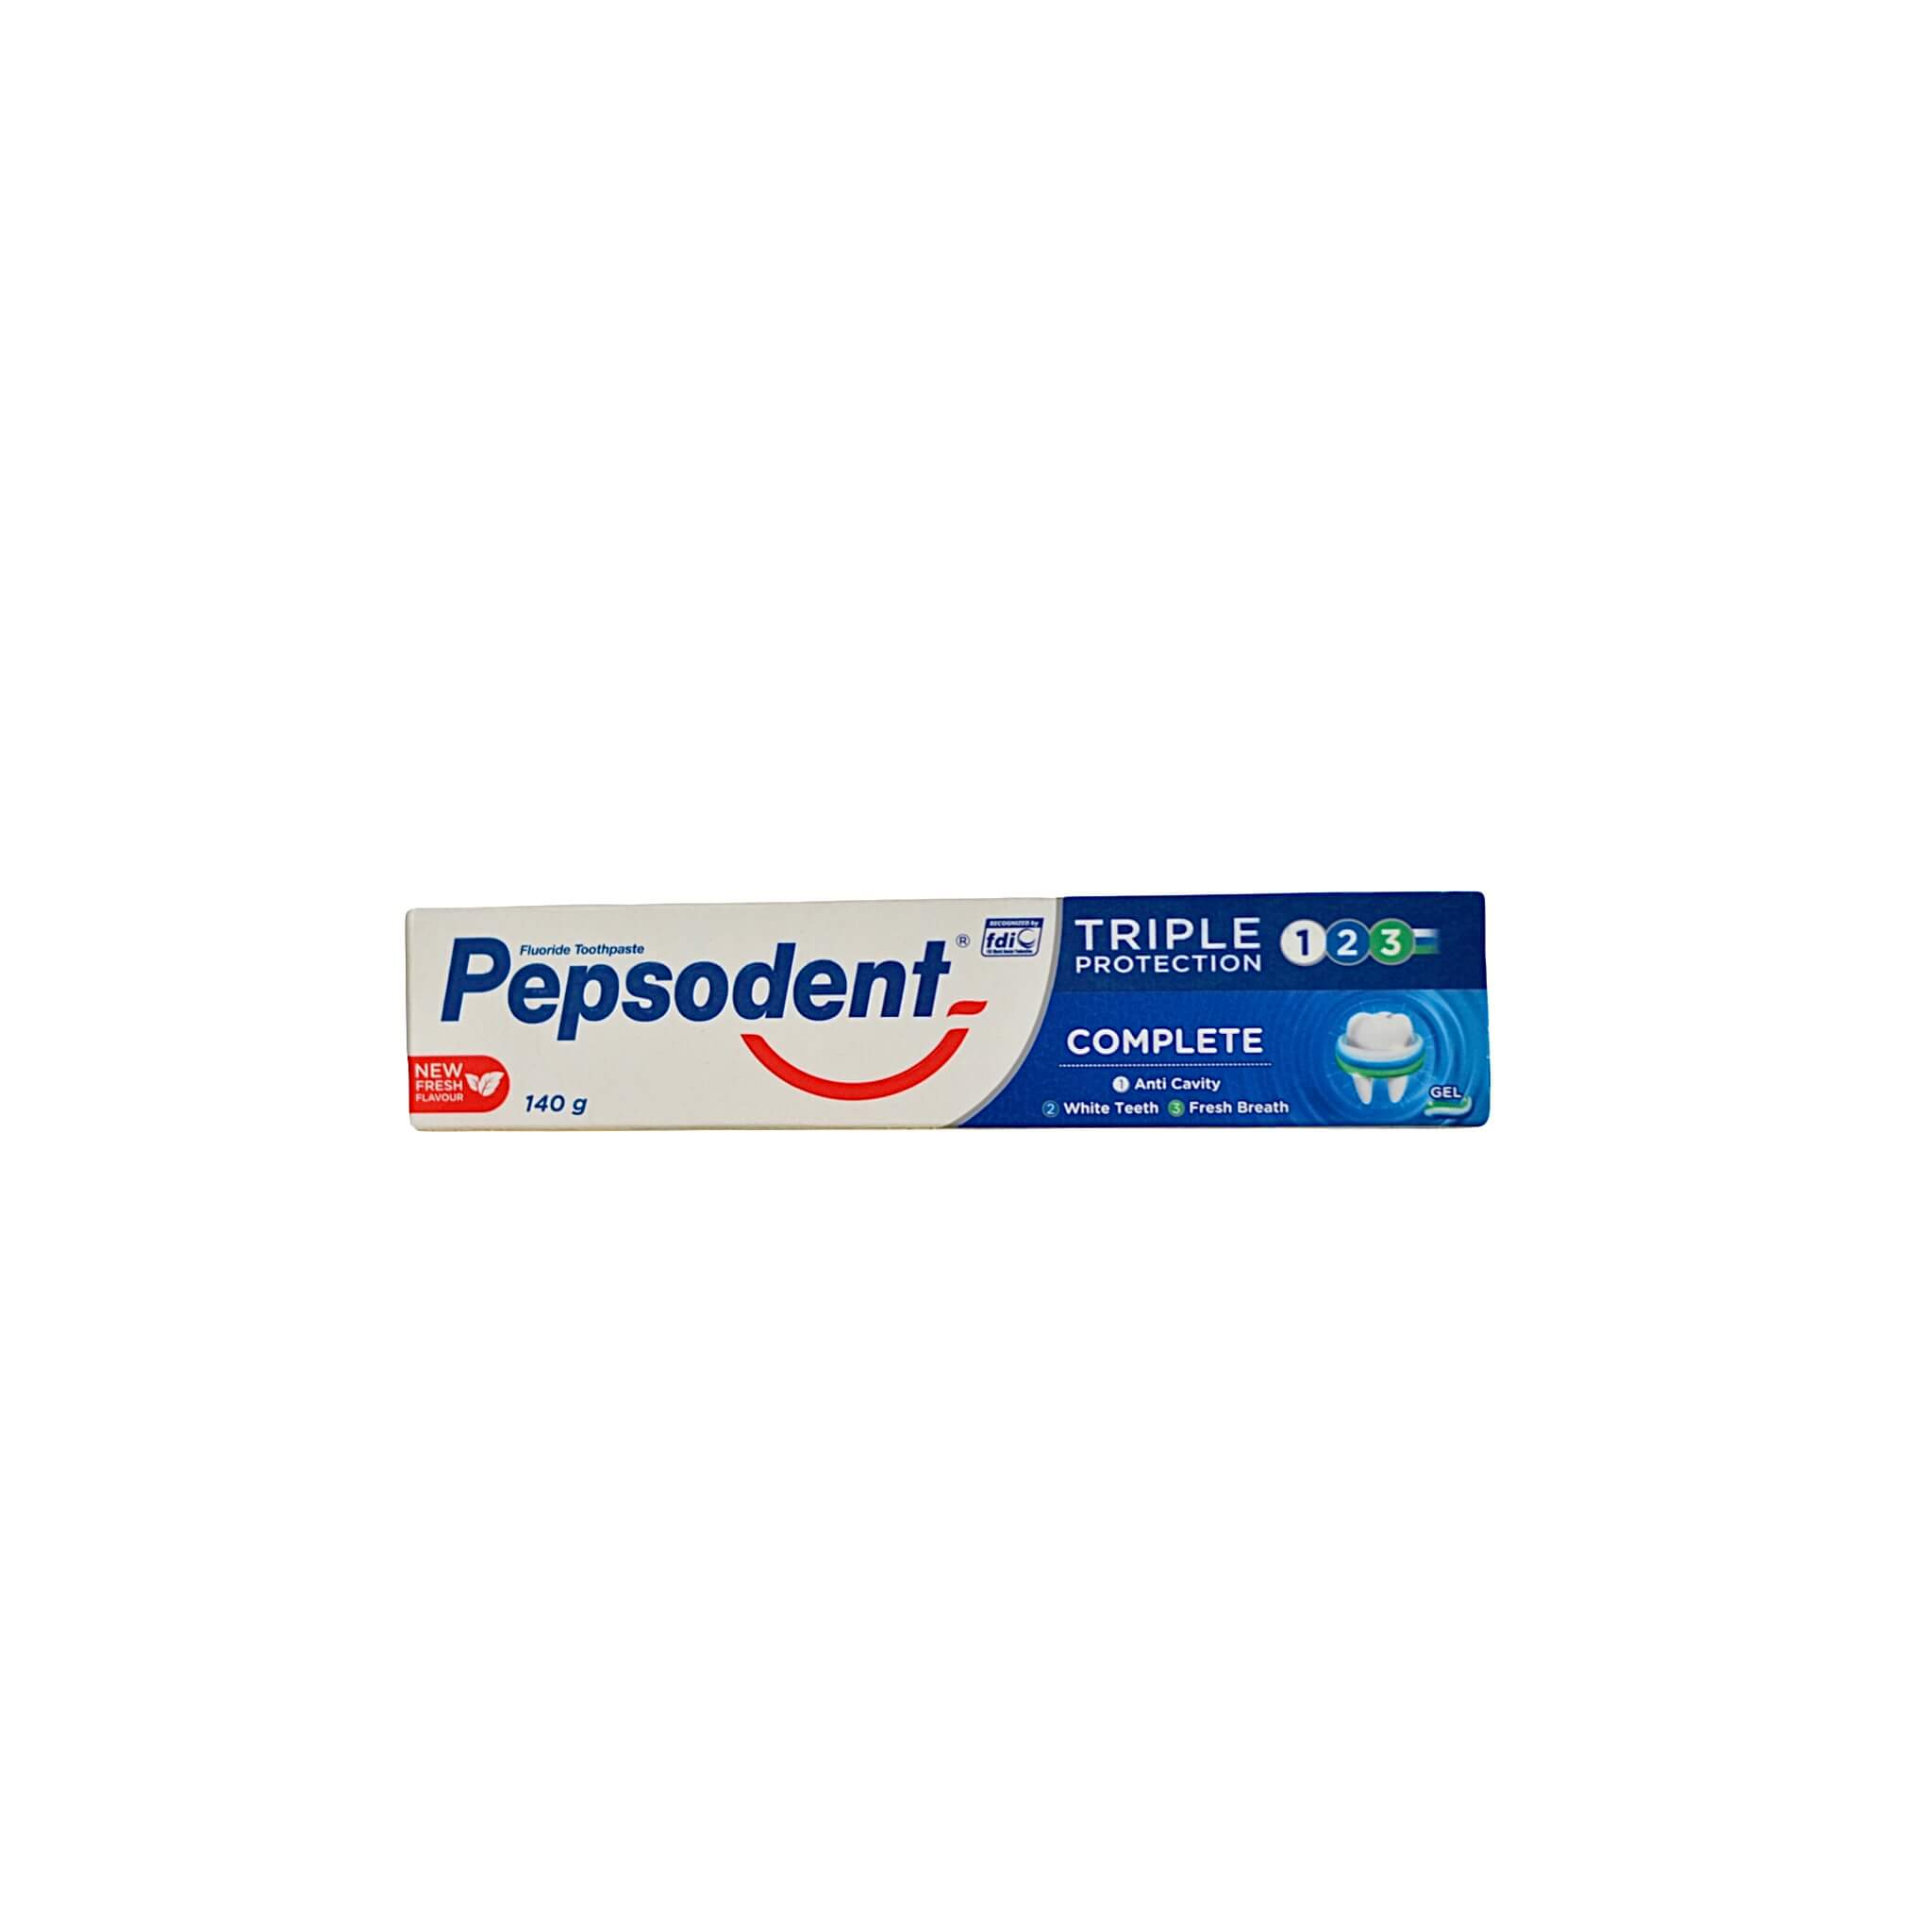 a tube of Pepsodent Toothpaste